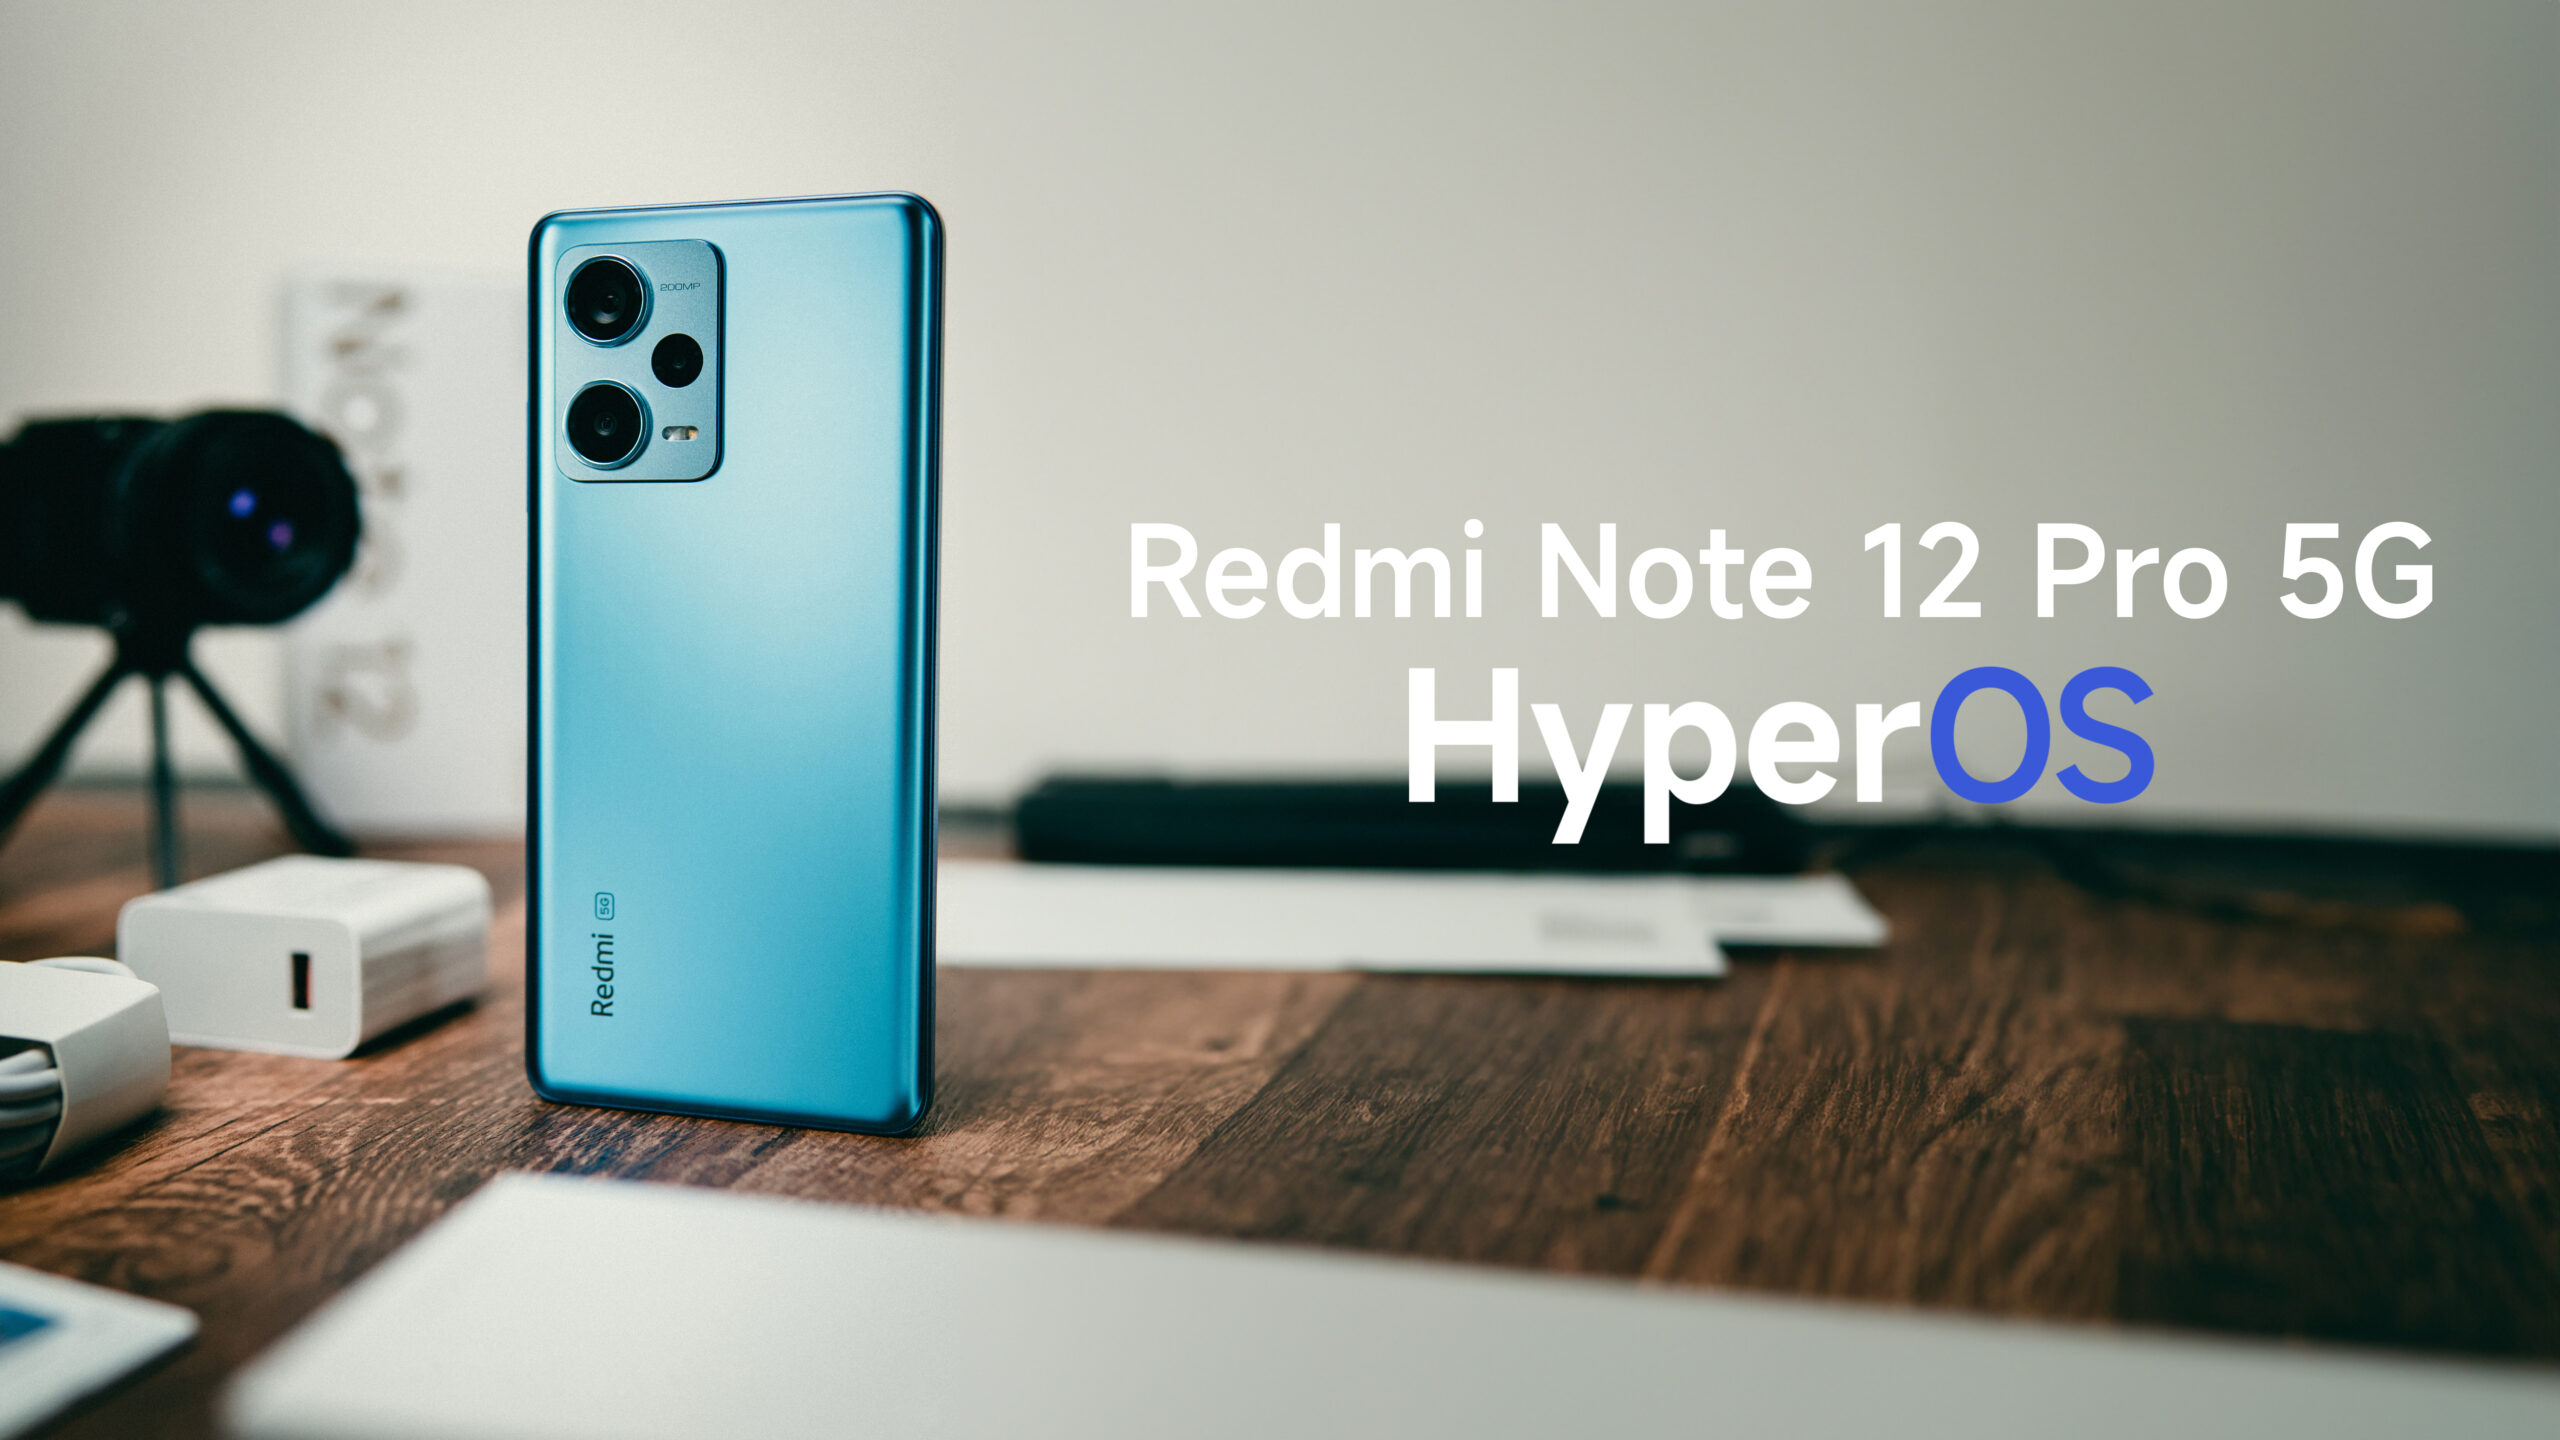 Redmi Note 12 Pro 5G's legendary HyperOS update coming soon 